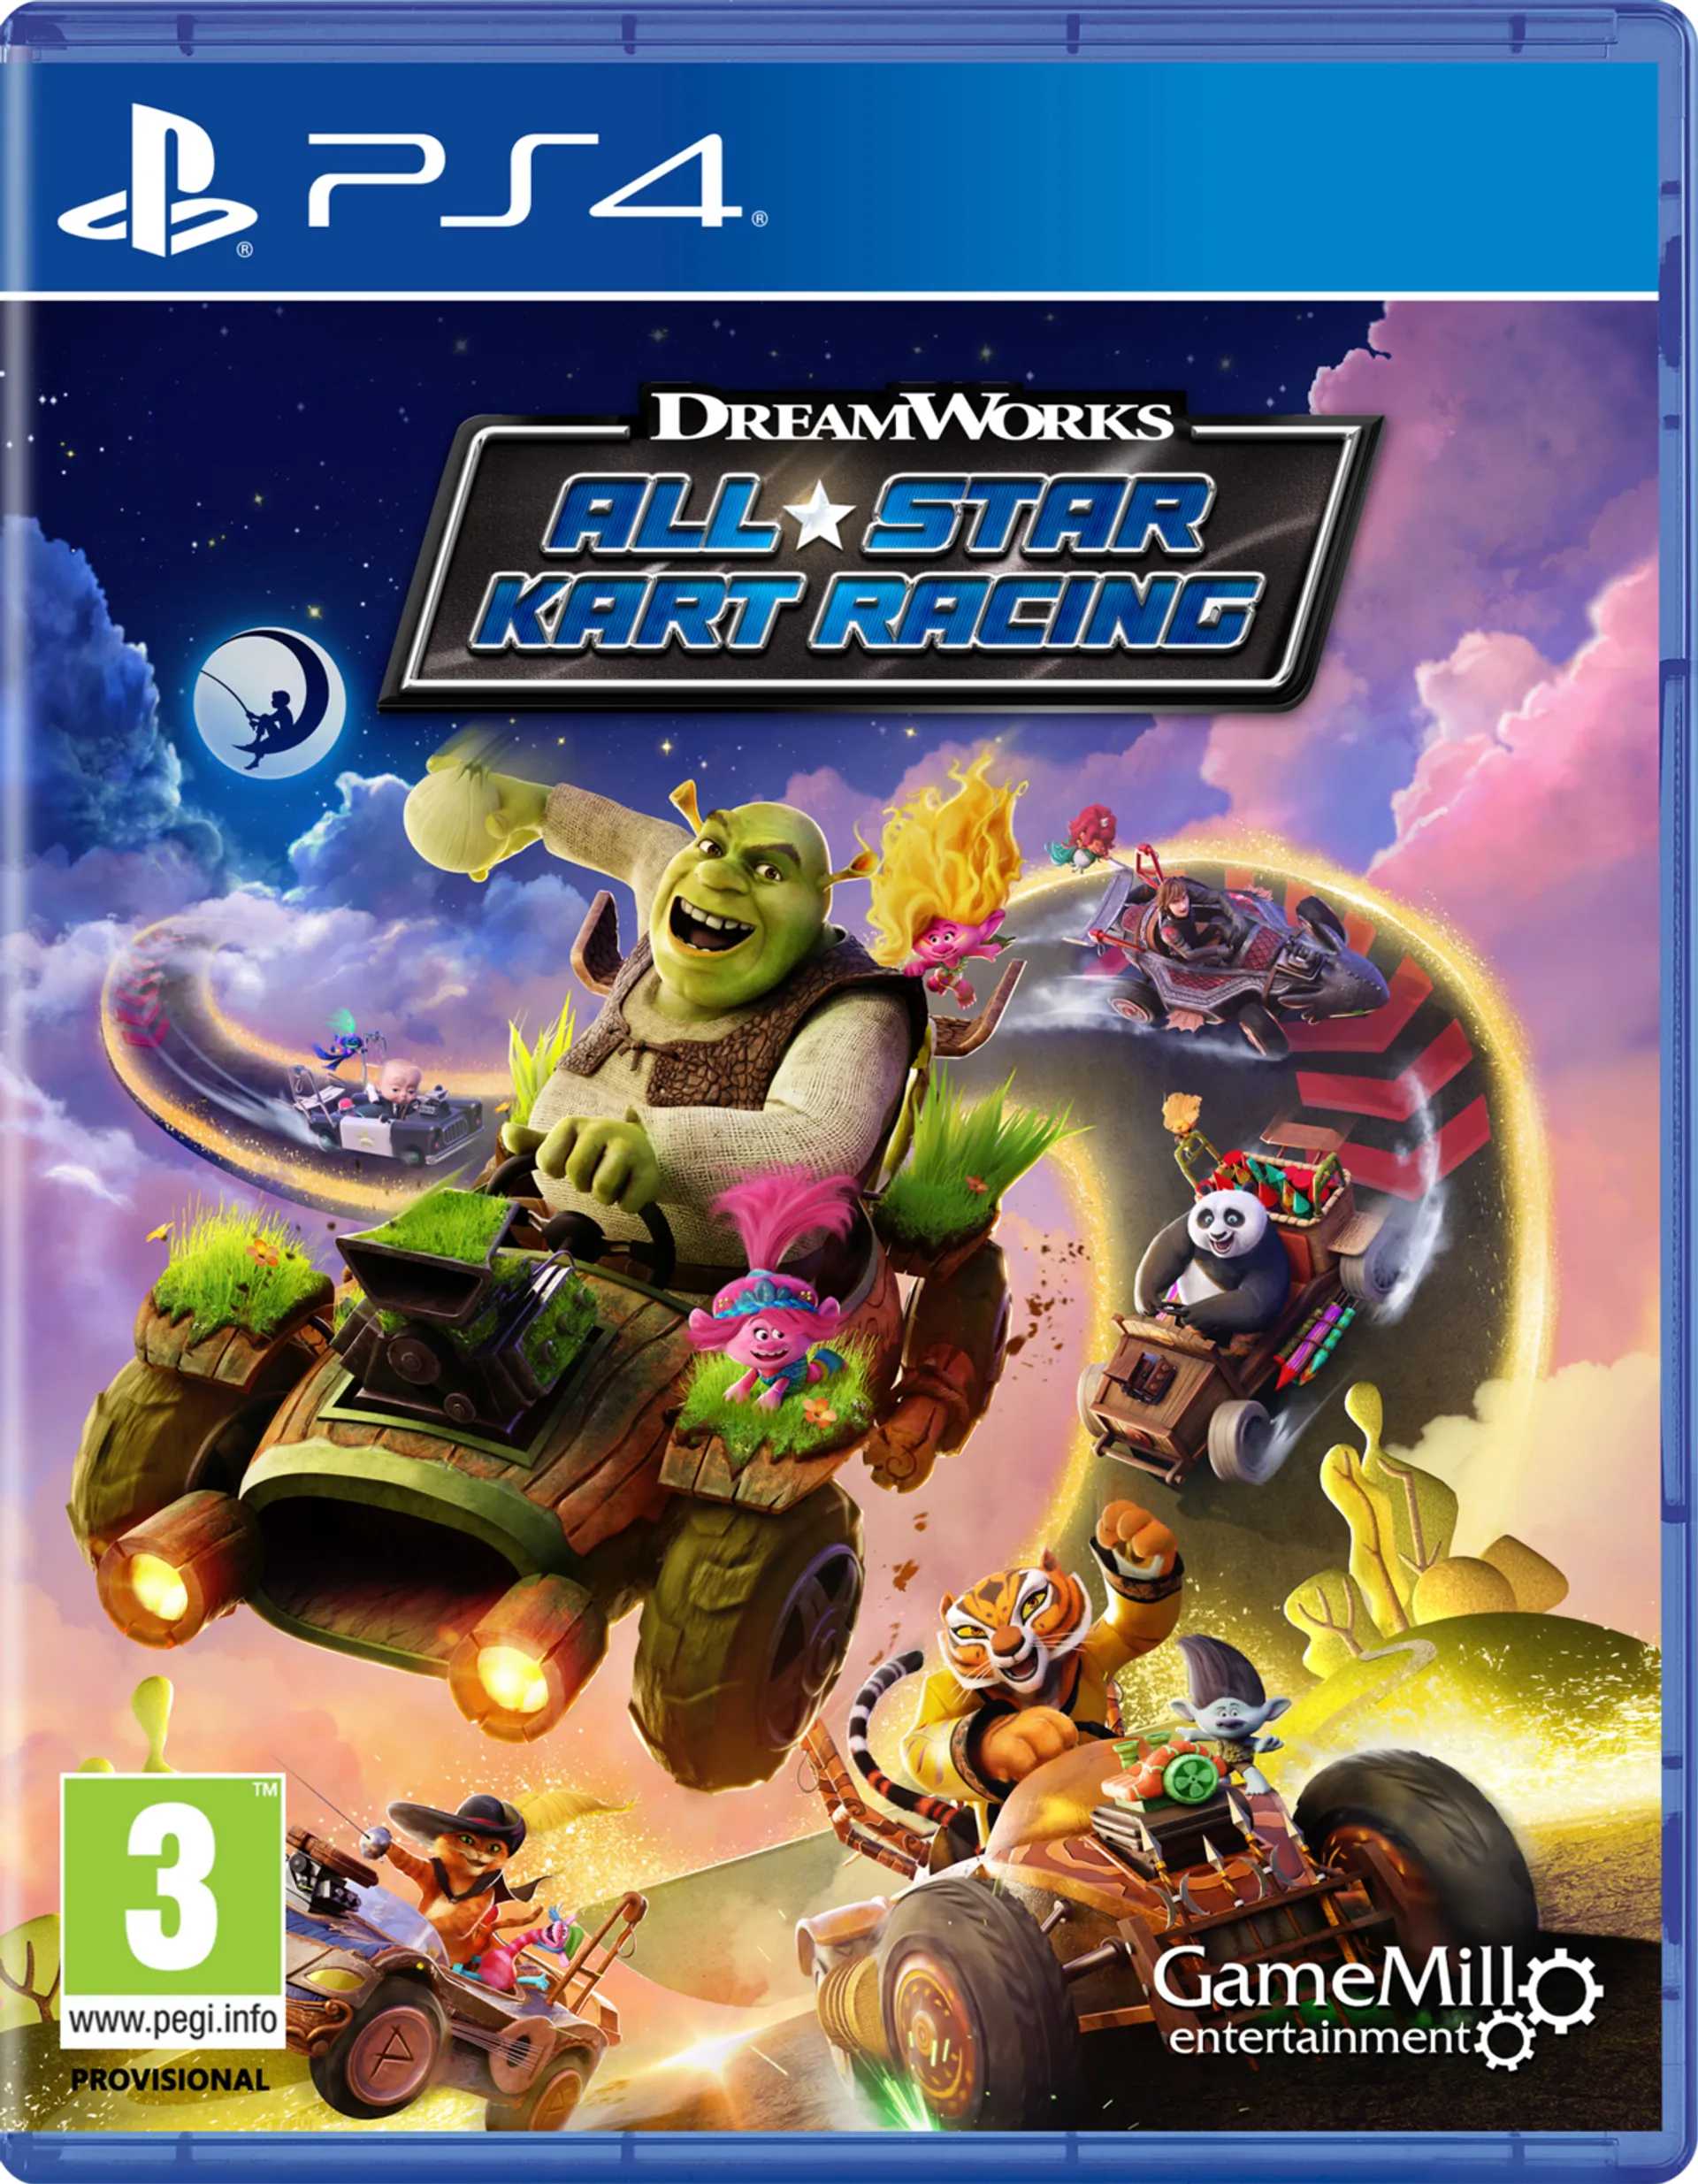 PS4 Dreamworks All-star racing